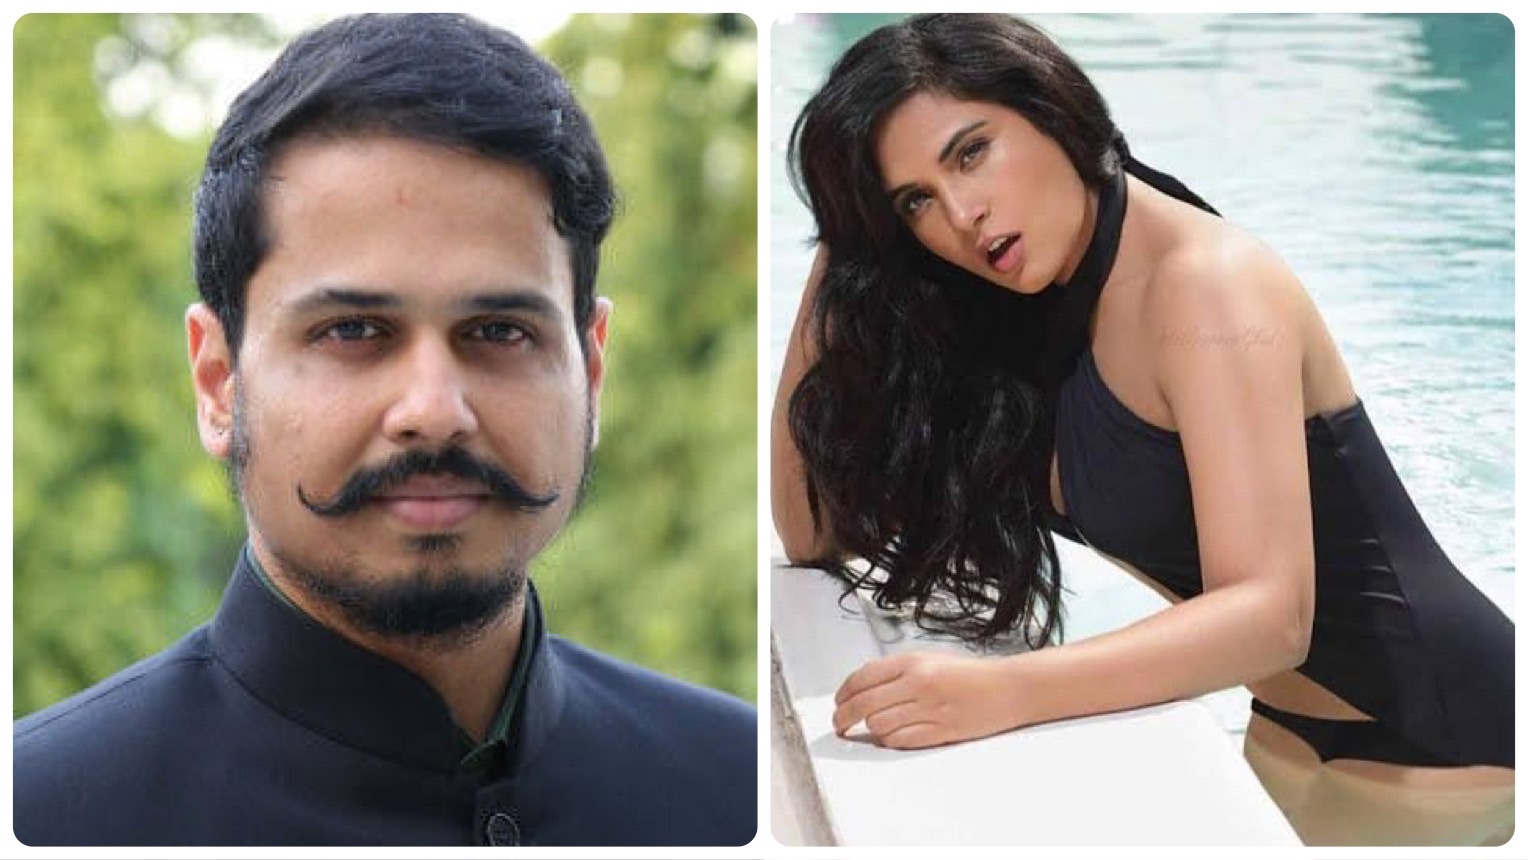 Actor Meena Nude Images - Journalist Shiv Aroor faces online attack over India Today show featuring  Richa Chadha's bikini pictures